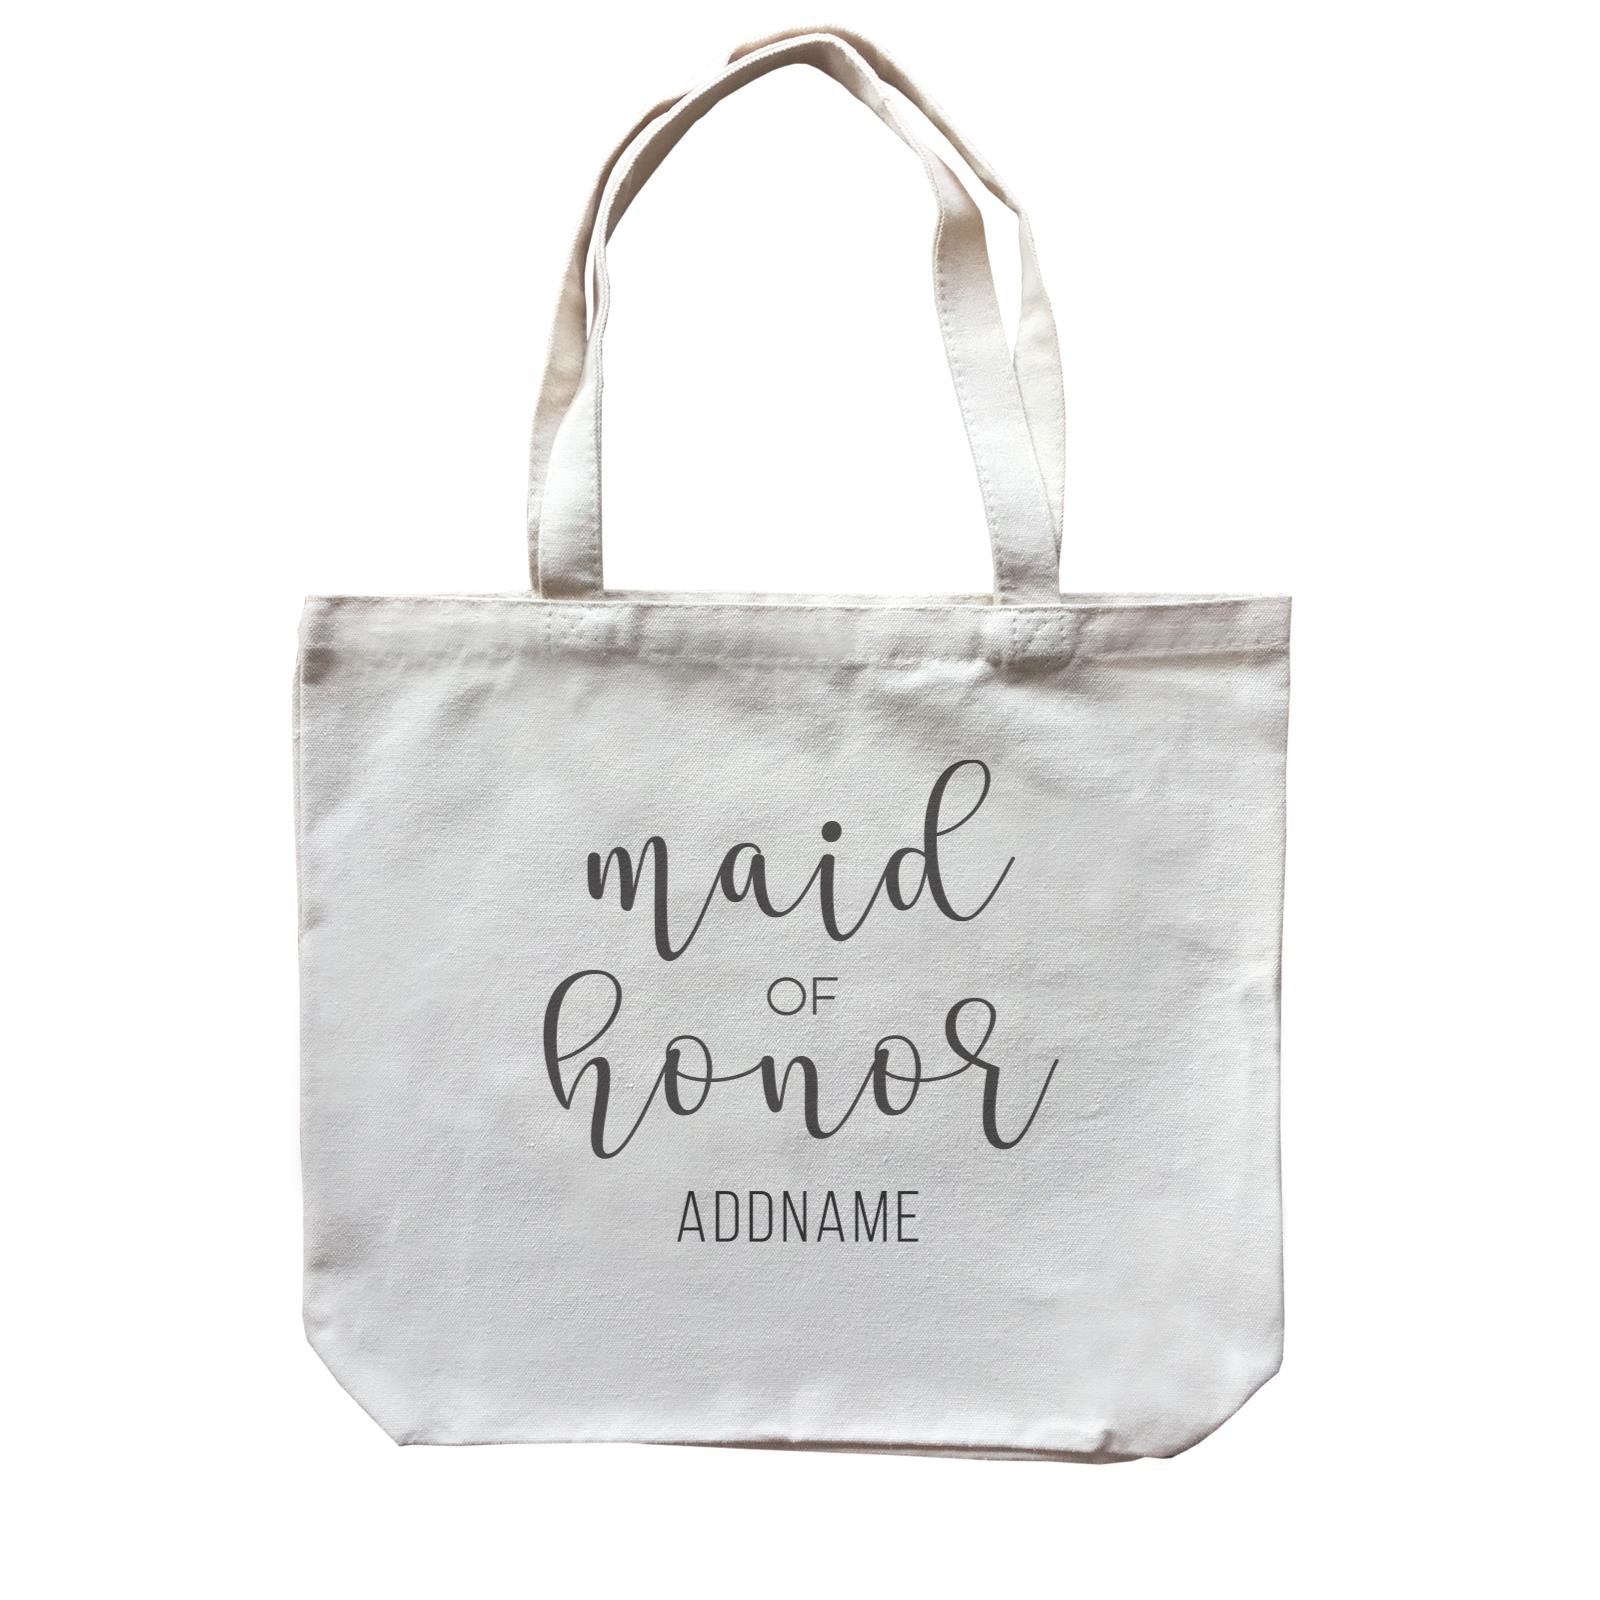 Bridesmaid Calligraphy Maid Of Honour Subtle Addname Canvas Bag